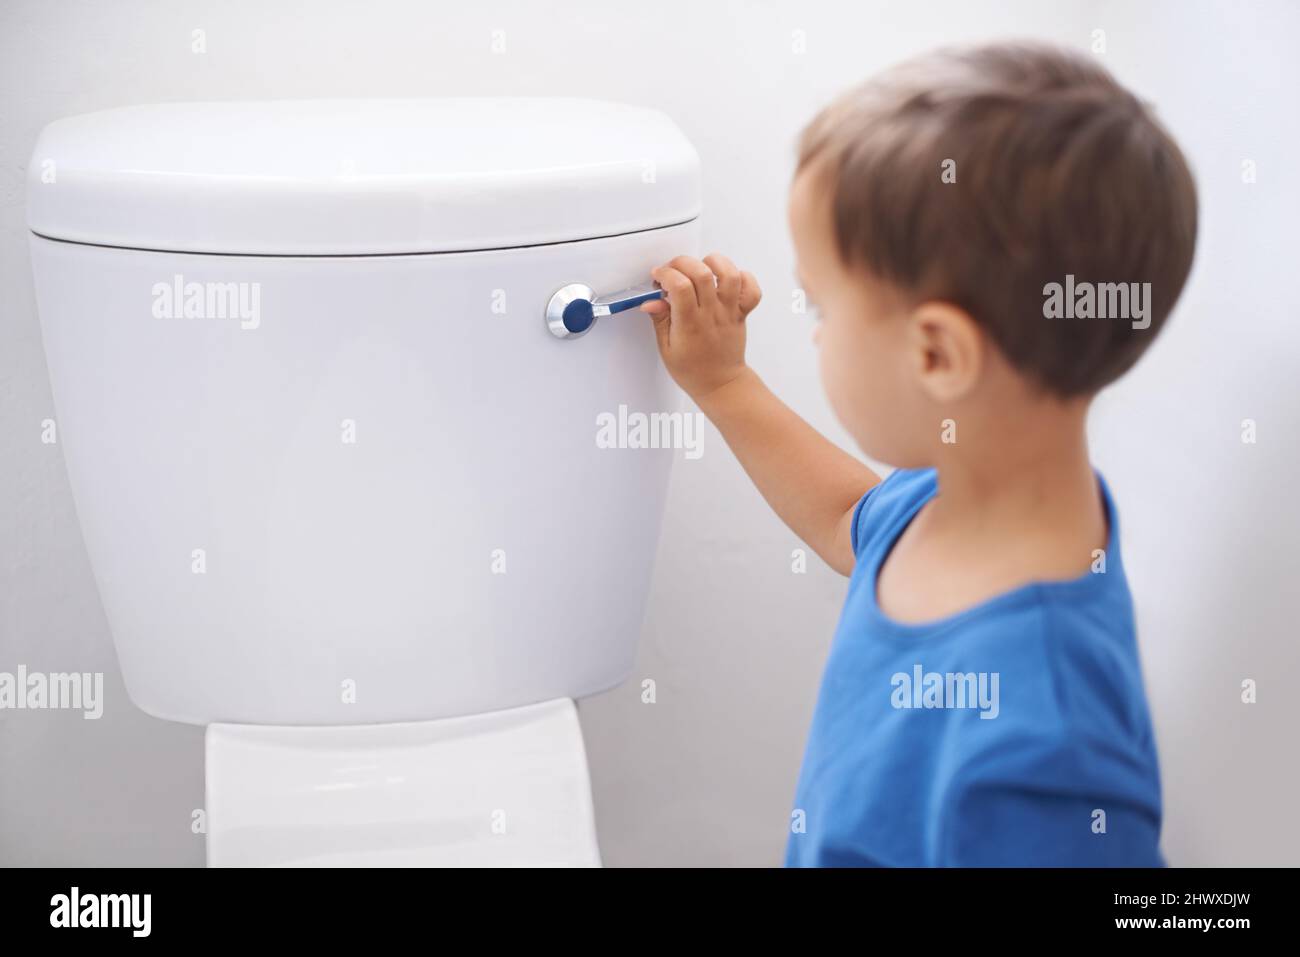 All done. Shot of a cute young boy flushing a toilet. Stock Photo